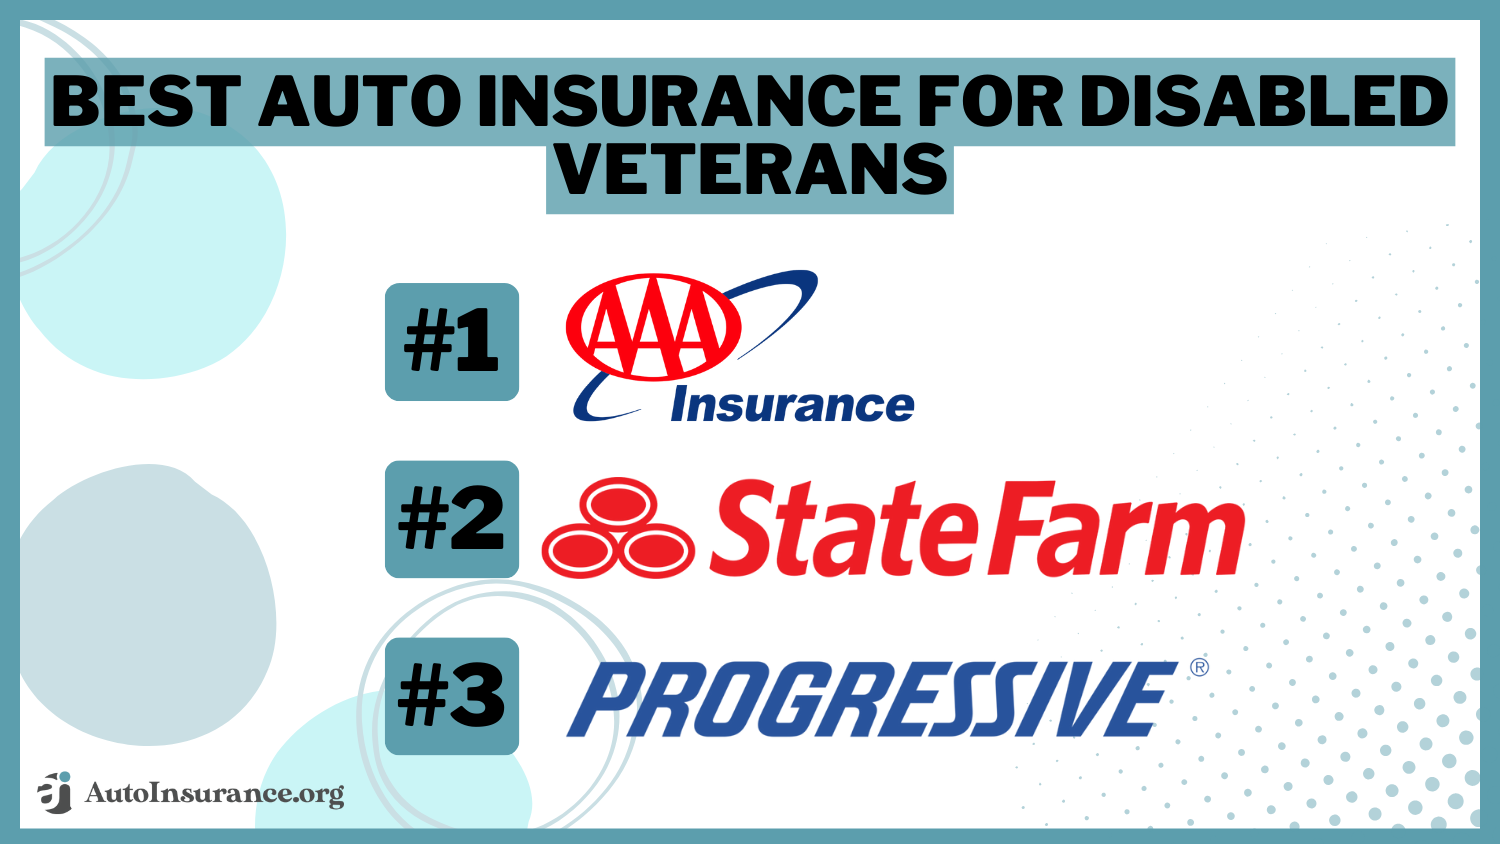 AAA, State Farm, Progressive: Best Auto Insurance for Disabled Veterans